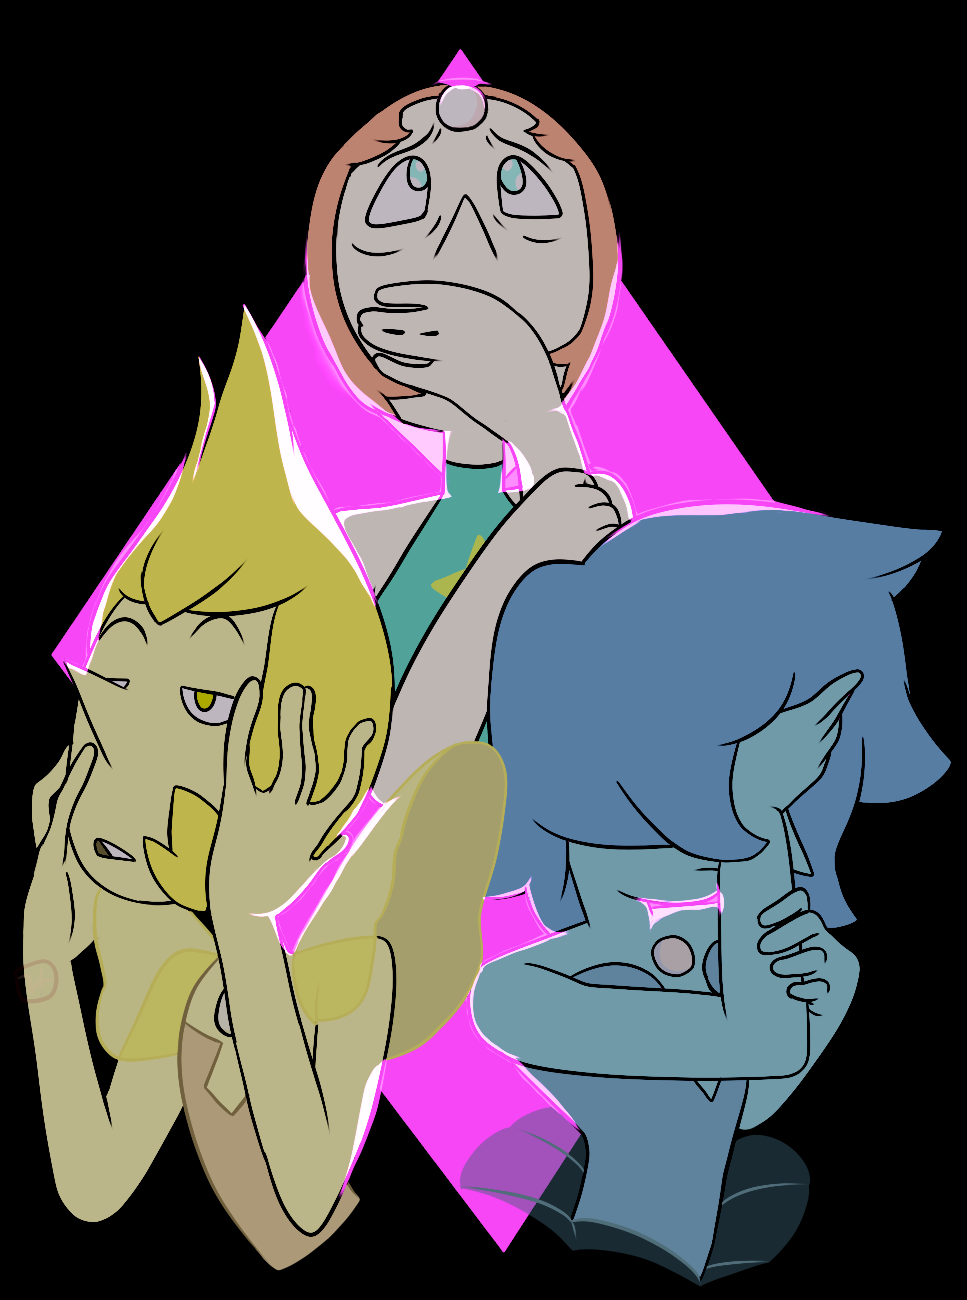 Hear no evil…Speak no evil…See no evil…There are some things that are impossible for me to say to you steven.. —– When I seen the theories of the pearls representing this, I just had to draw it...